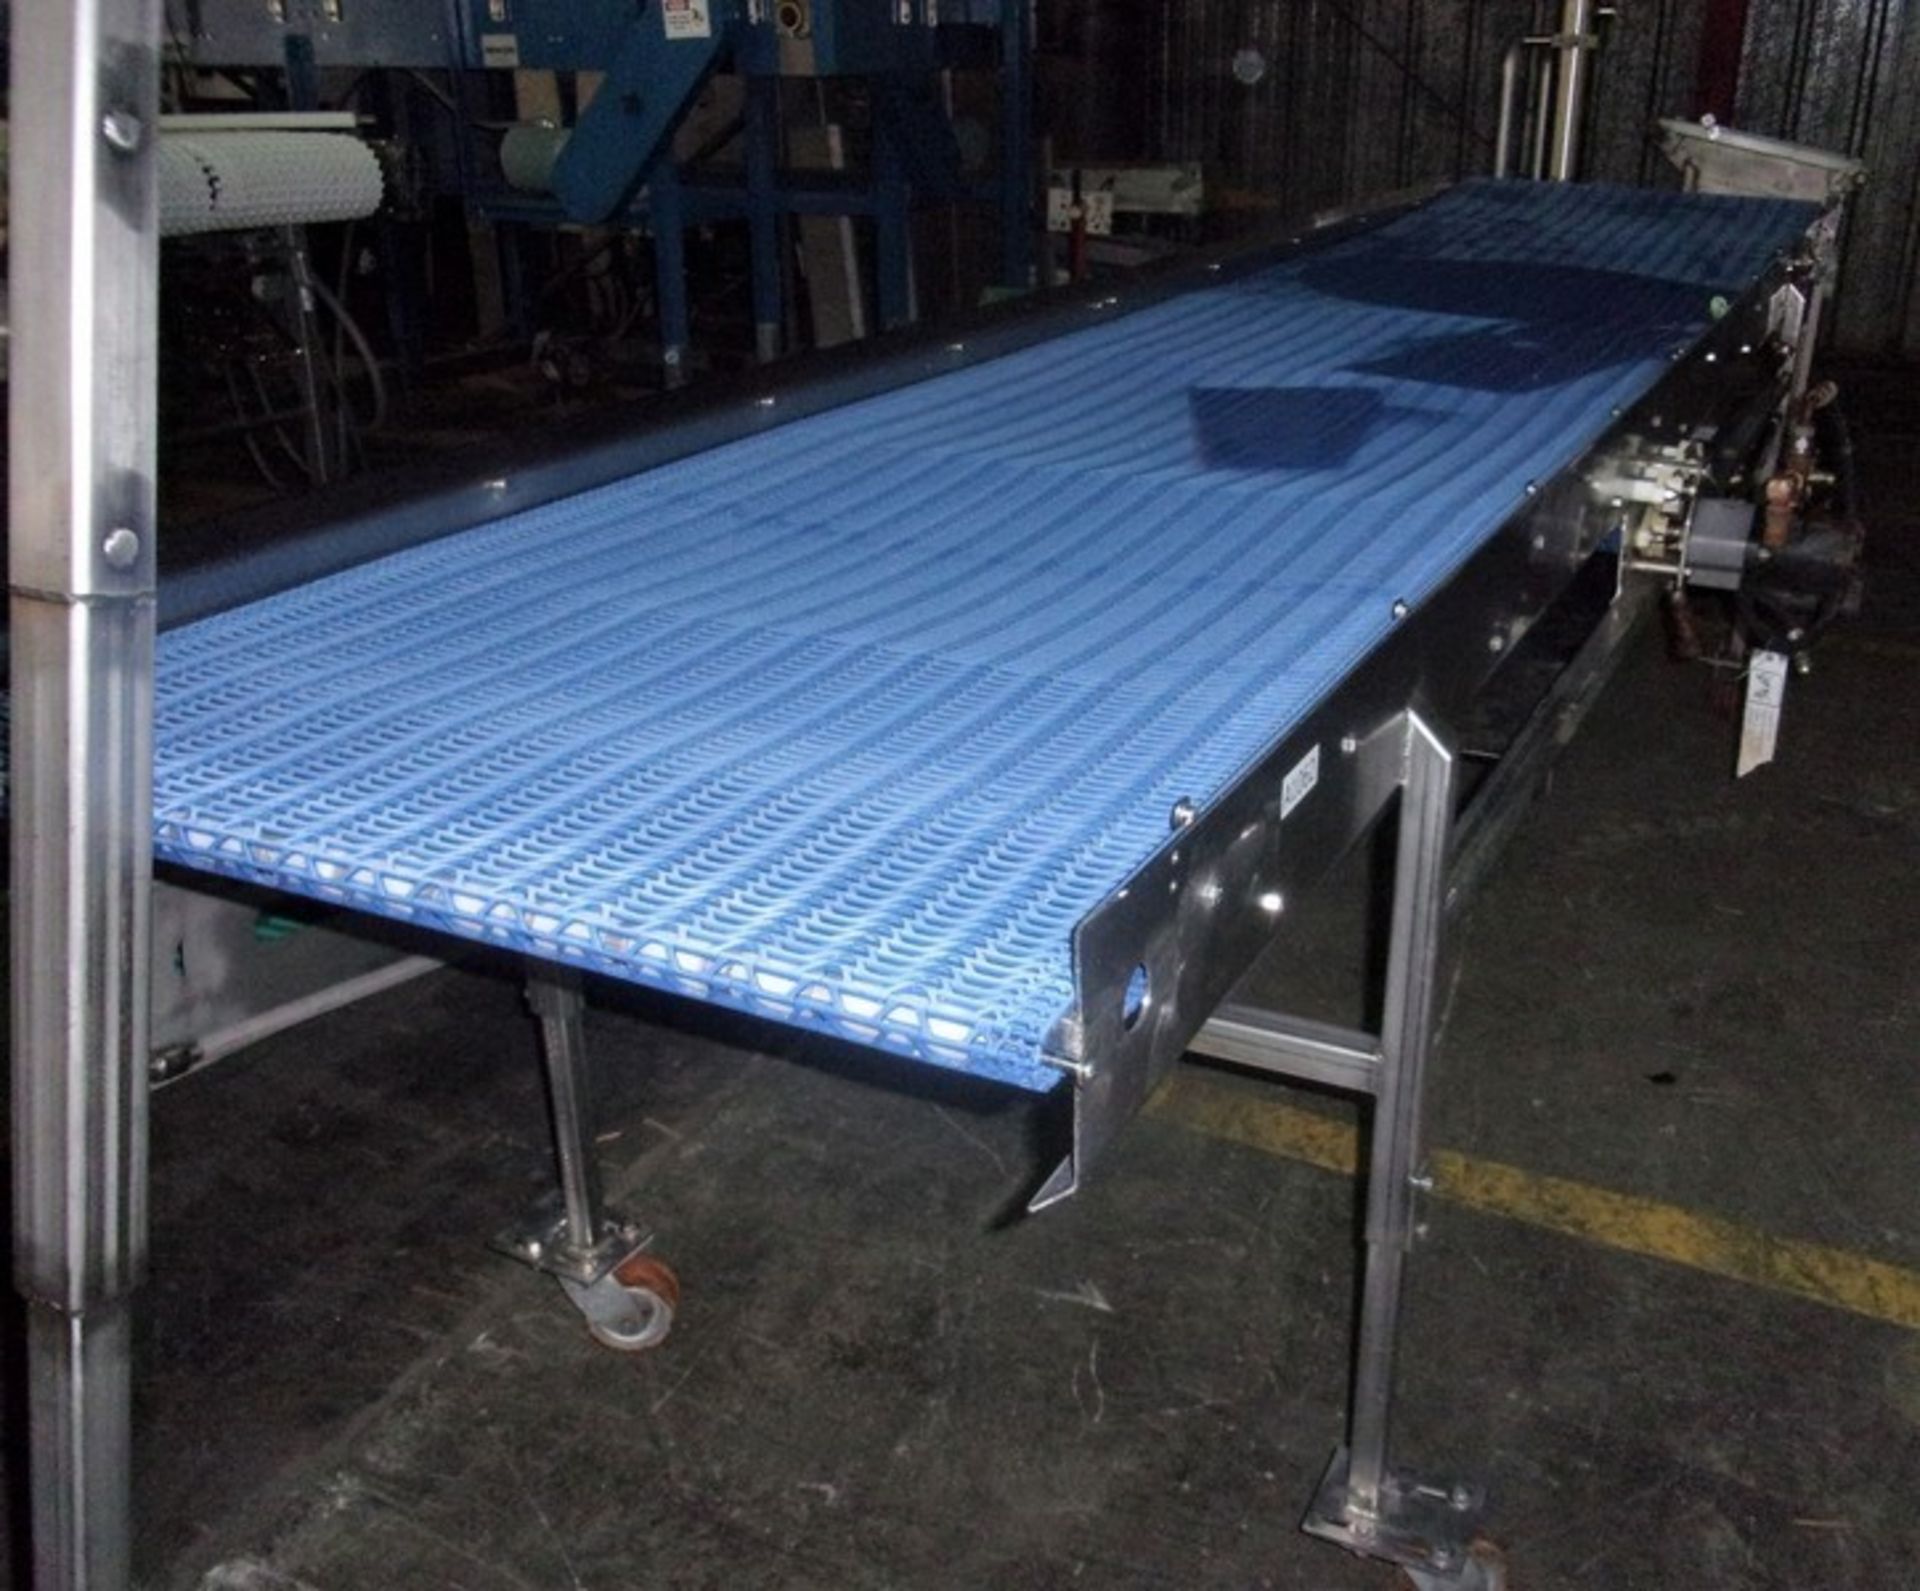 Aprox. 34" x 167" S/S Sanitary Blue Intralox Belt Conveyor, All S/S Construction, Infeed and